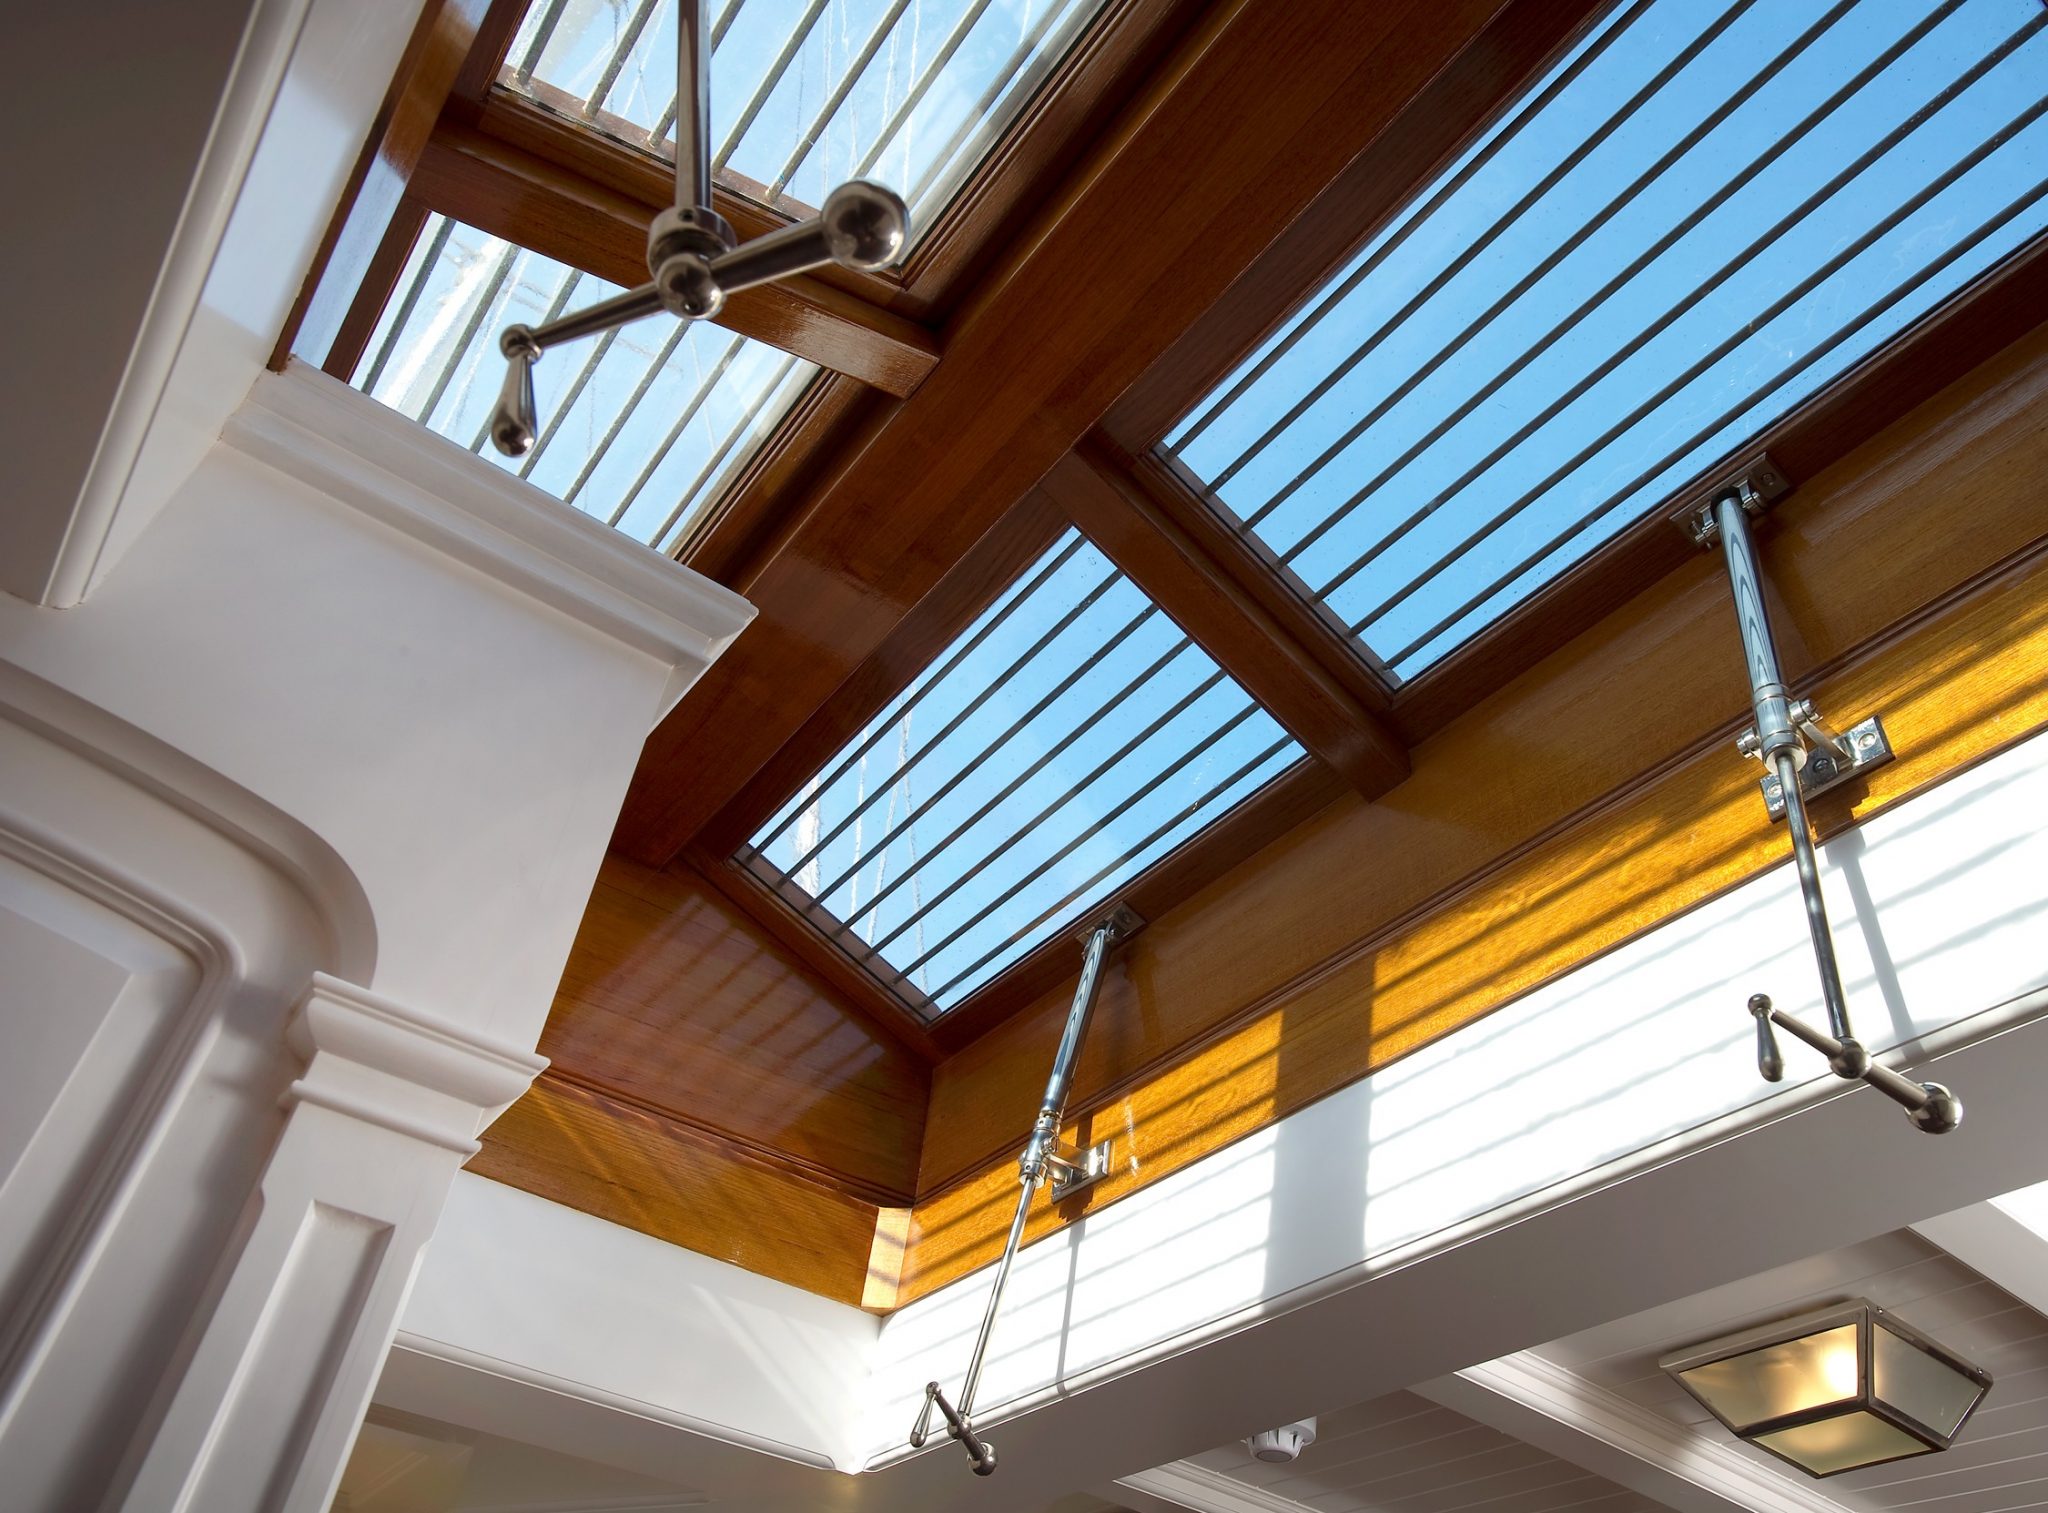 Hatch and Skylight Fittings